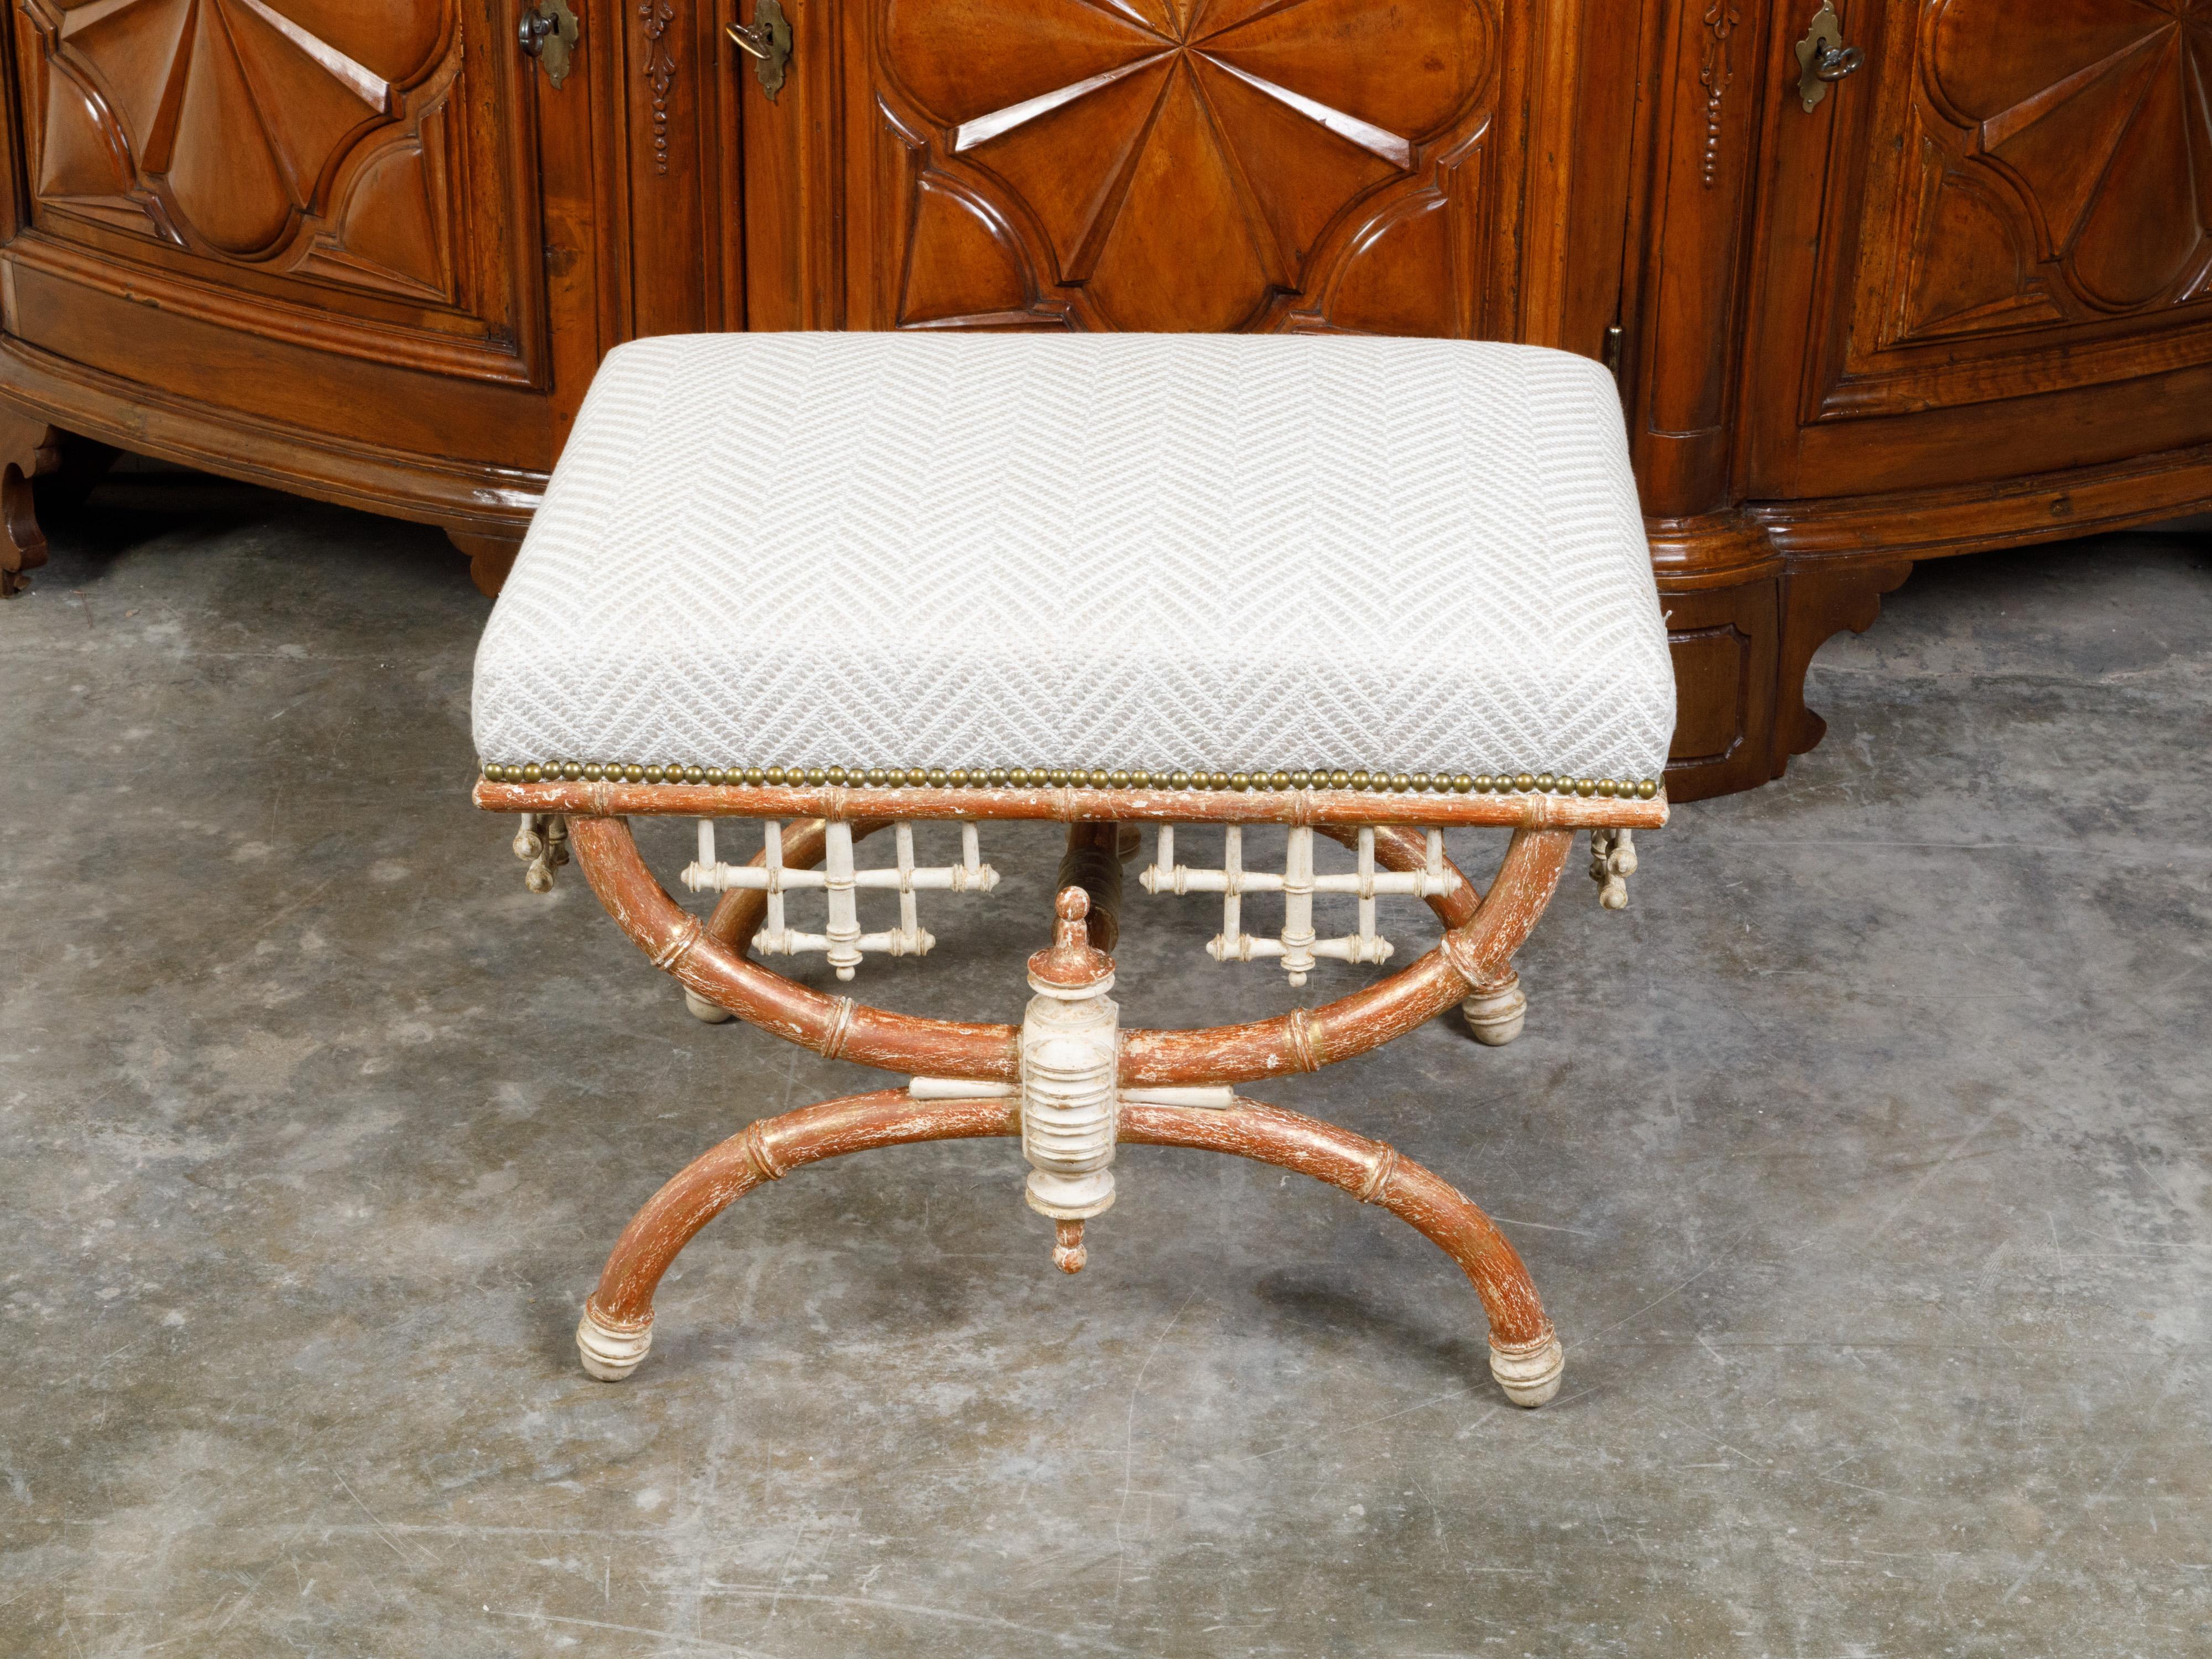 An English Chinese Chippendale style faux bamboo stool with X-Form base and new upholstery. Created in England, this stool features a rectangular upholstered seat secured with a brass nailhead trim, resting above Chinese Chippendale style motifs